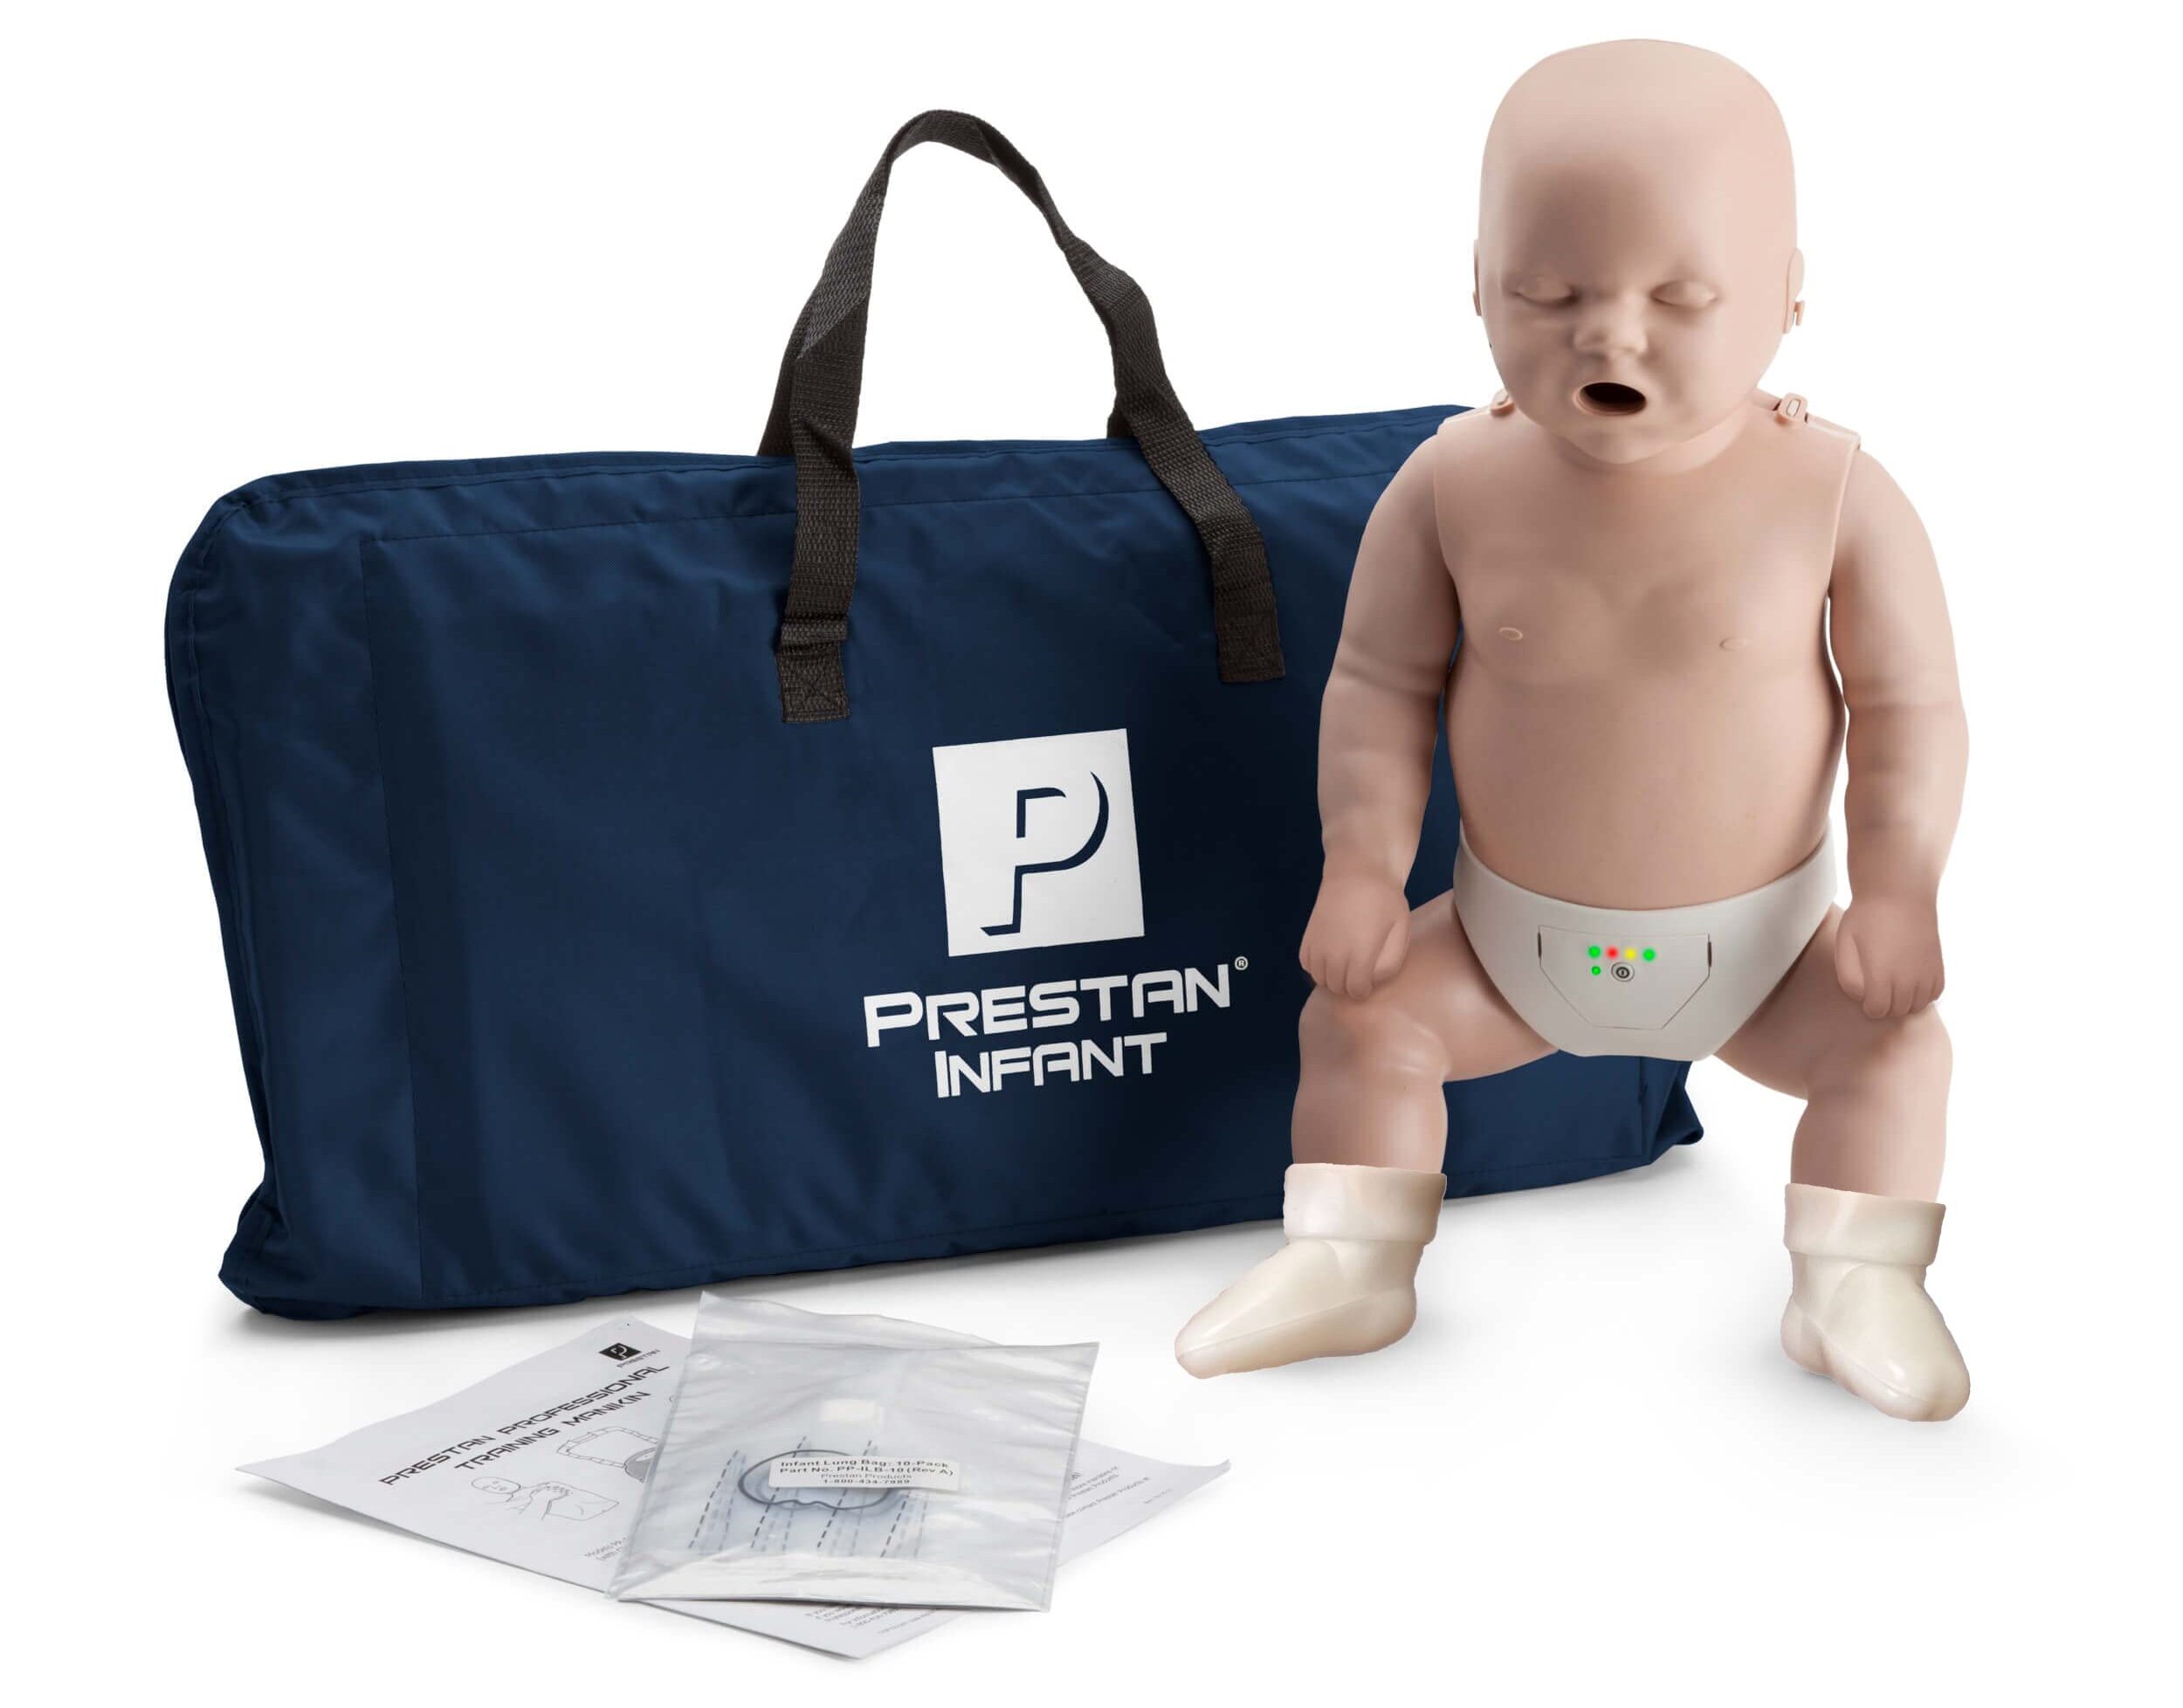 Advanced Cardiac Life Support (ACLS) Training Prestan Infant CPR Manikin with Indicator e1692699085187